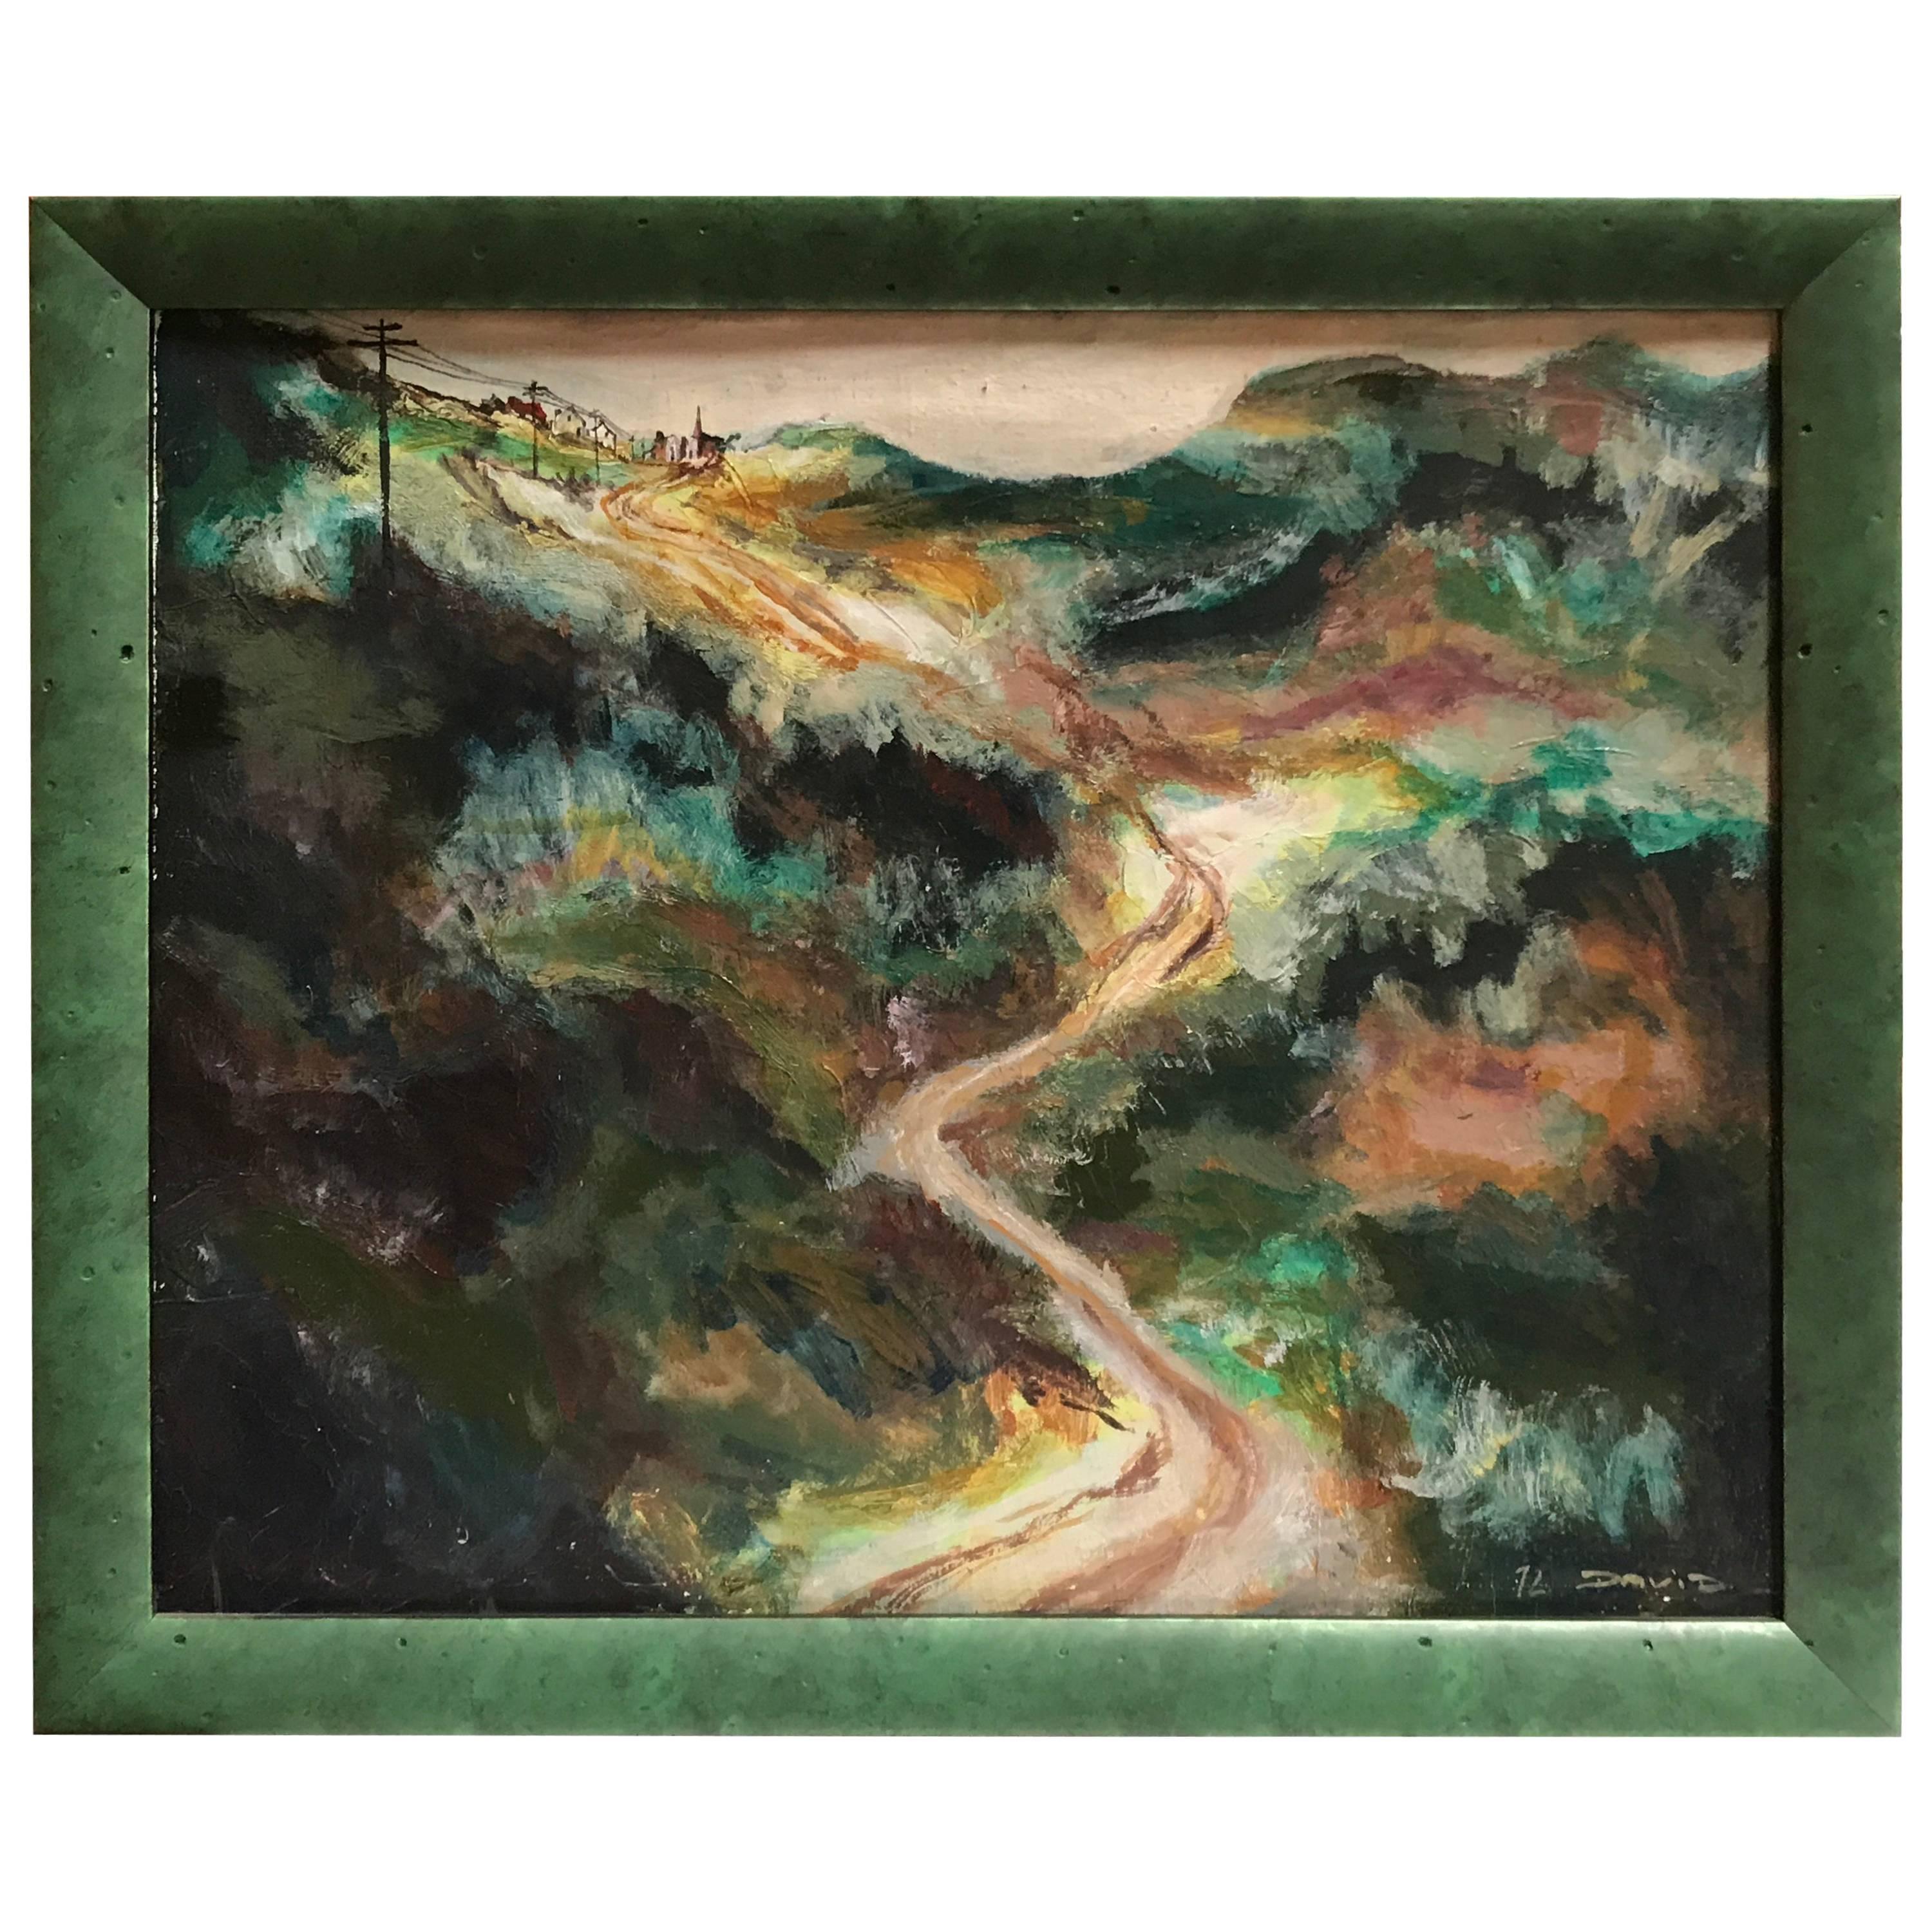 Charming Painting of a French Mountain Village Road Signed "David" For Sale